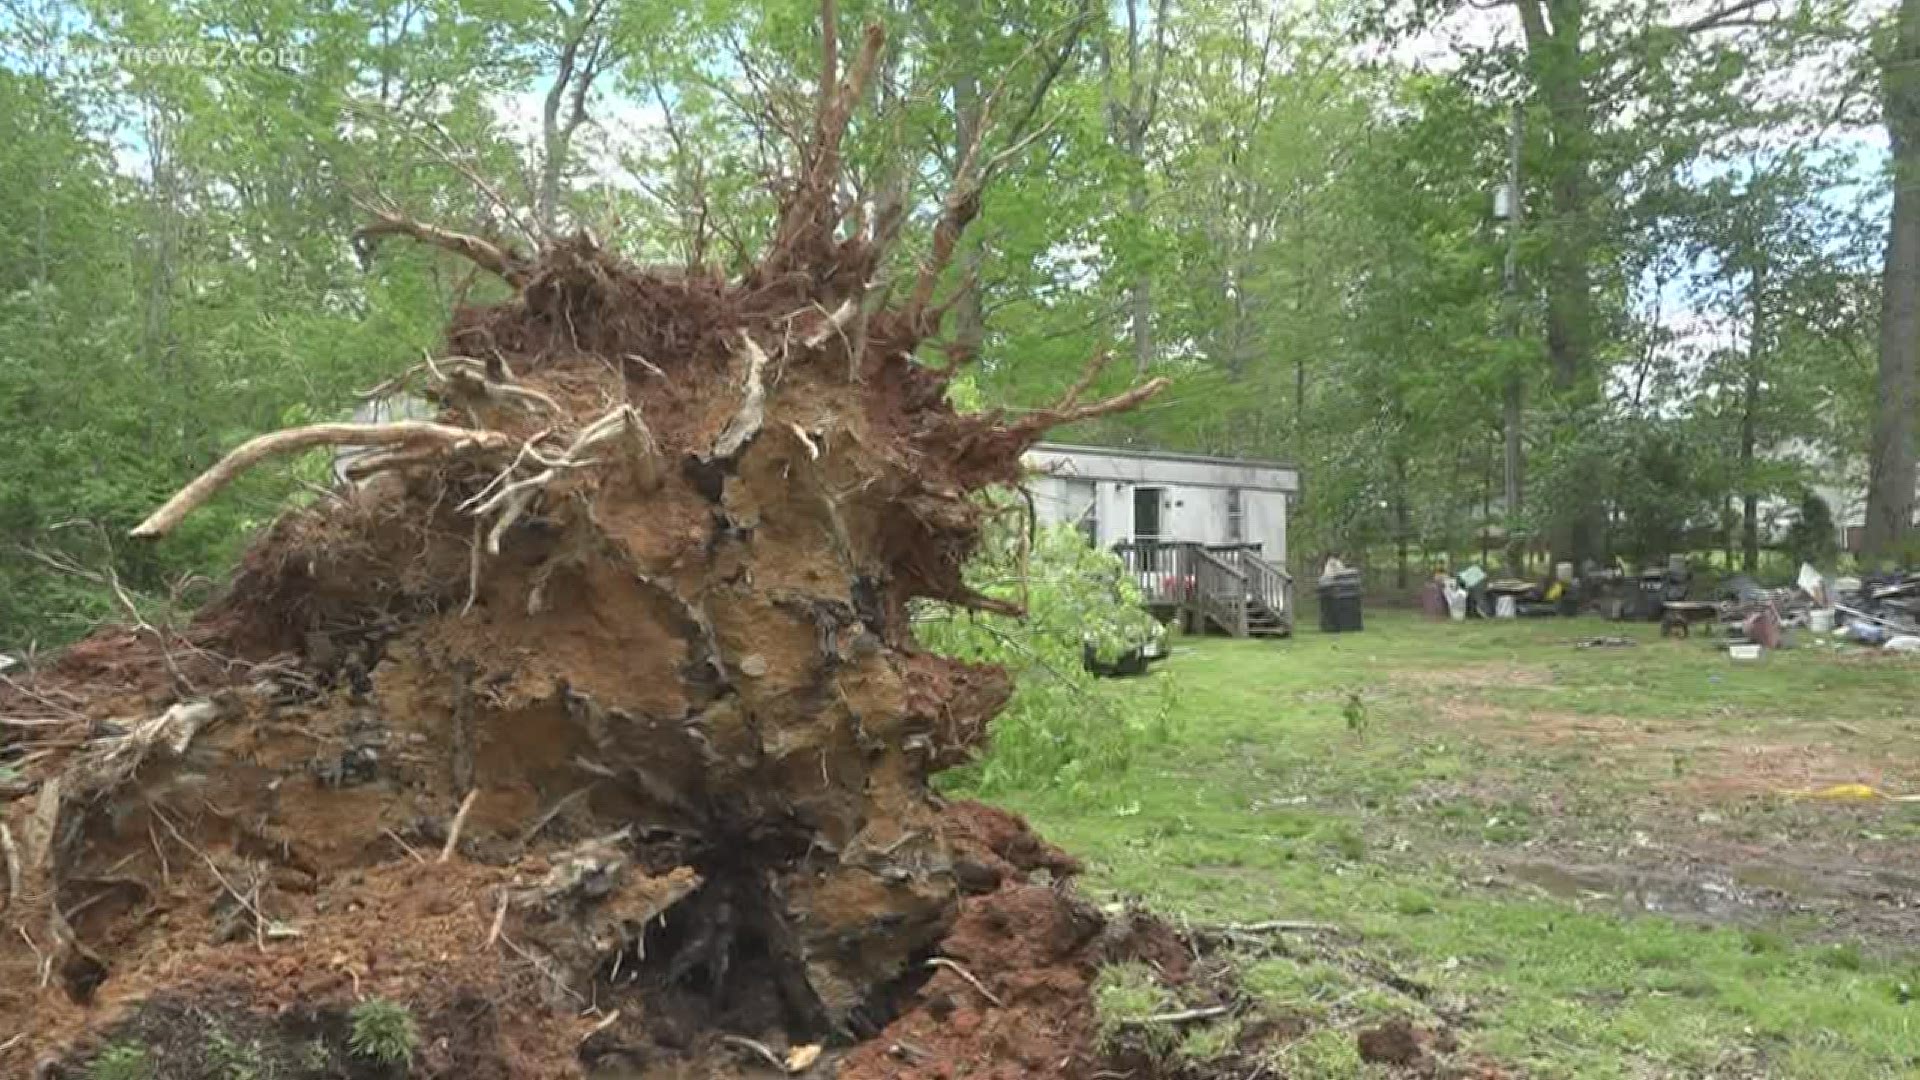 Beverly Long and her husband were sleeping when the tree fell. He was able to escape.